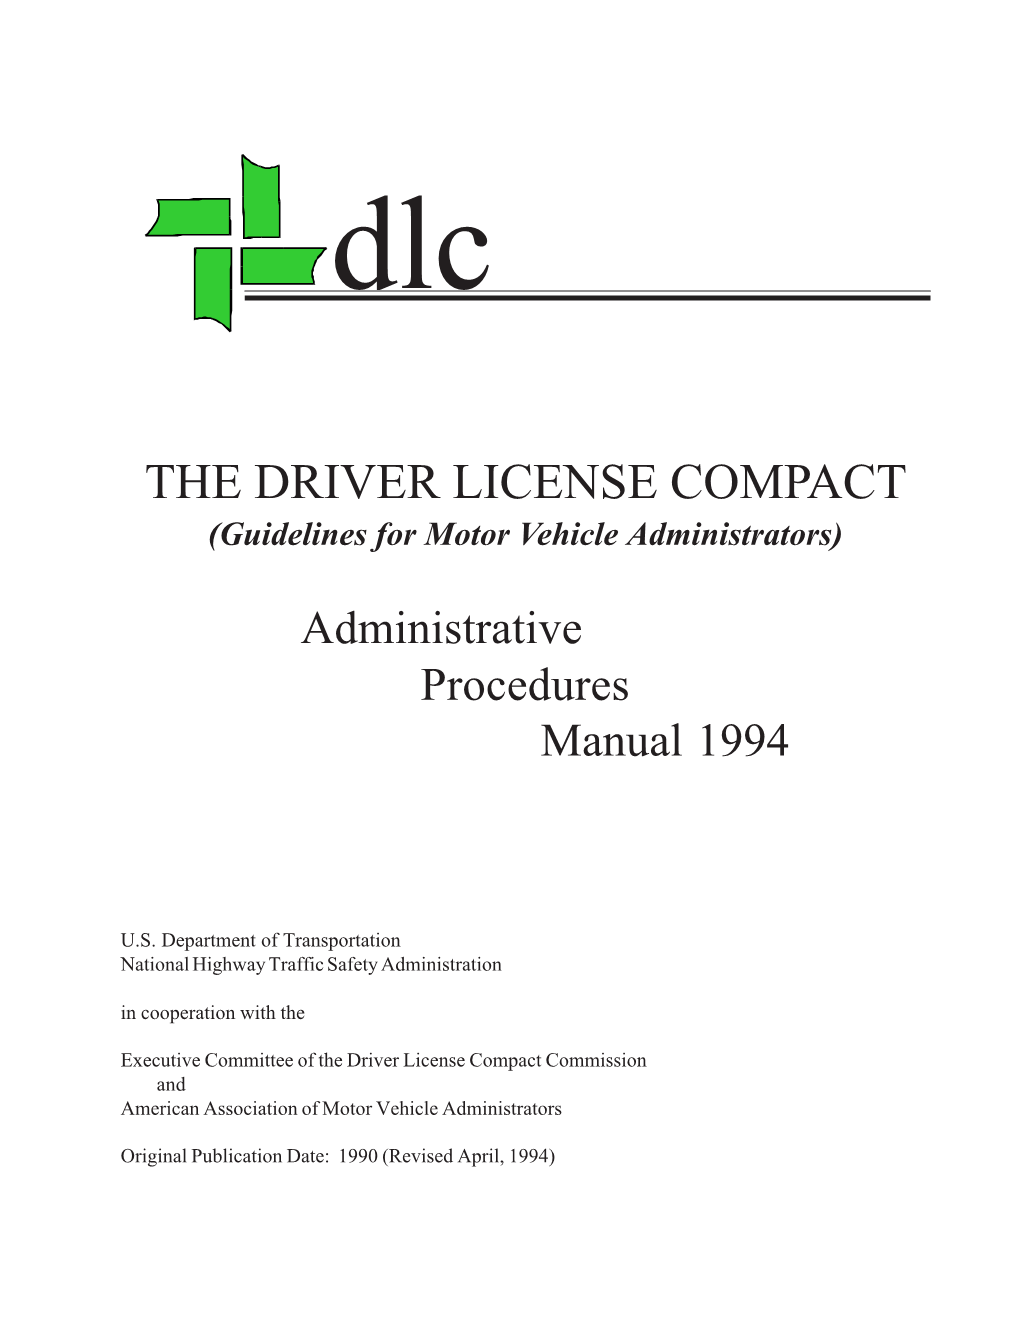 The Driver License Compact Administrative Procedures Manual